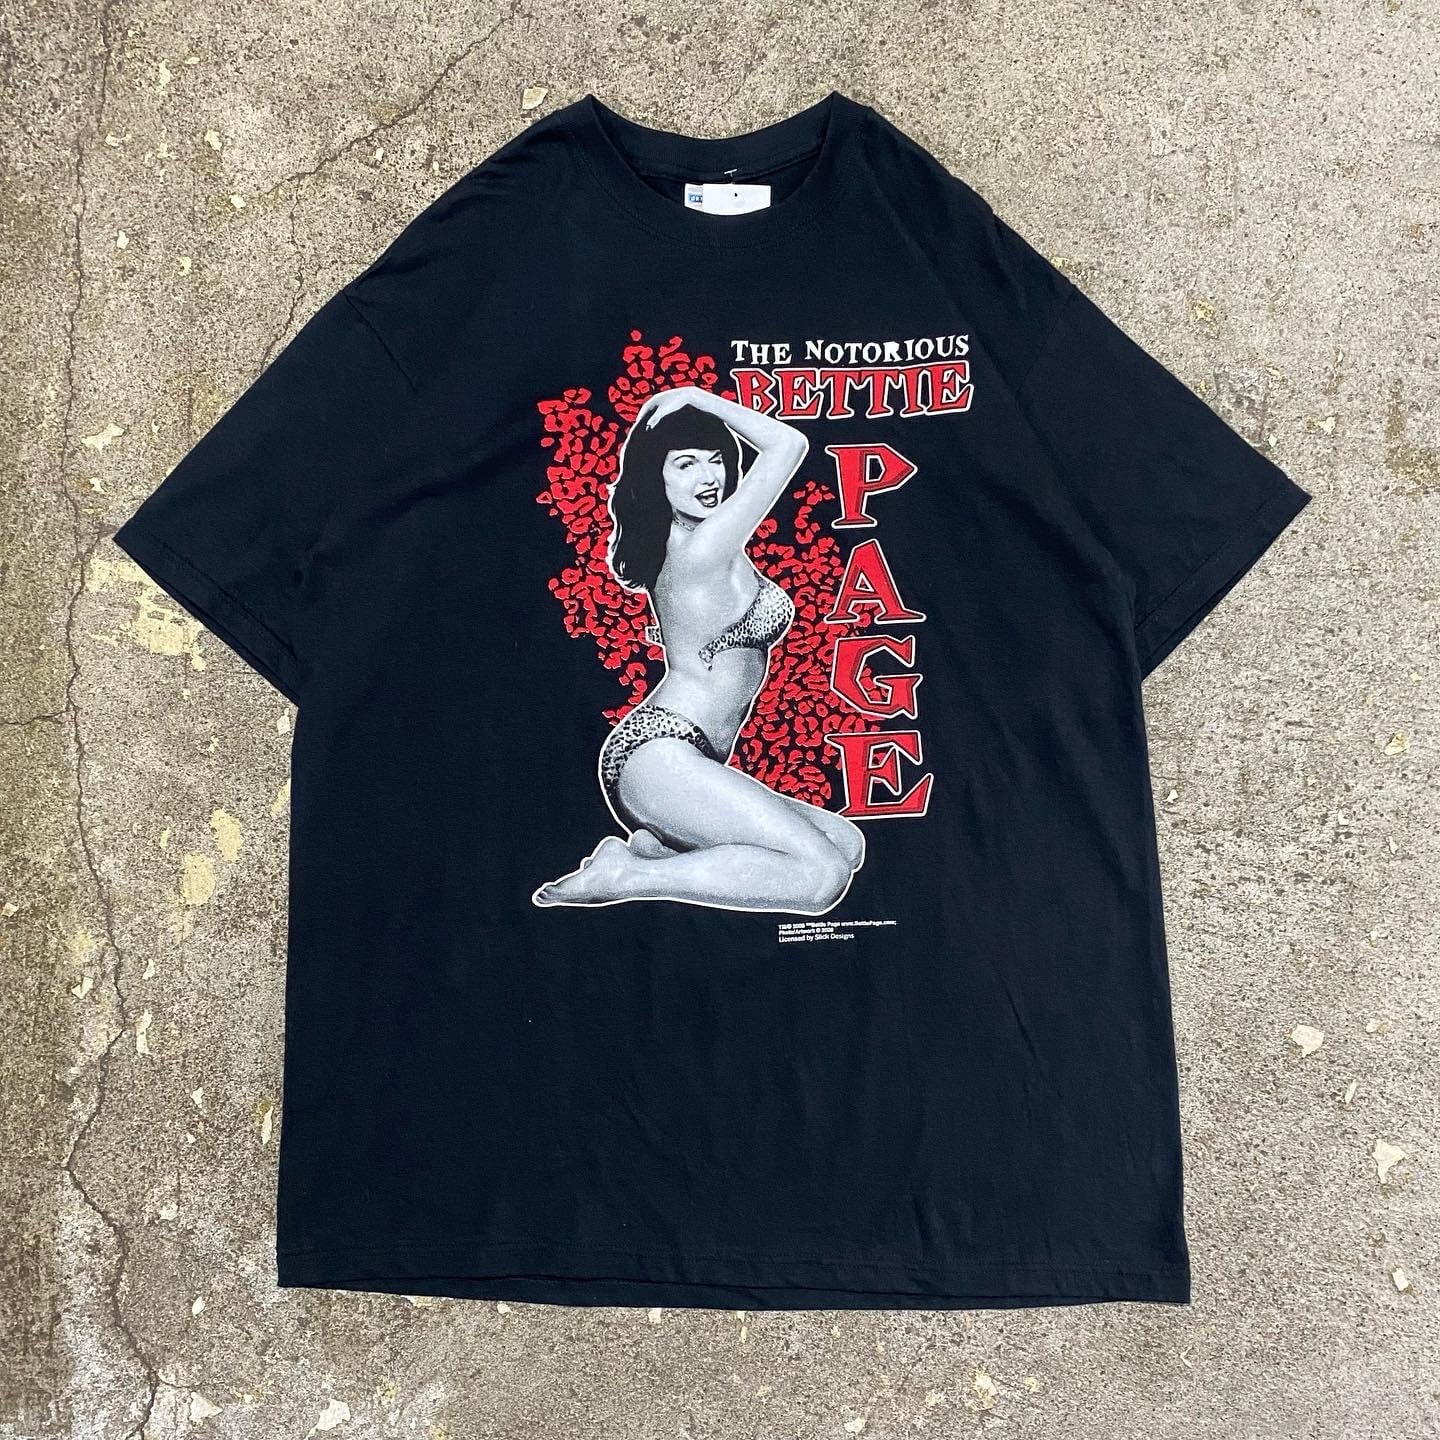 00s Bettie Page T-shirt | What'z up